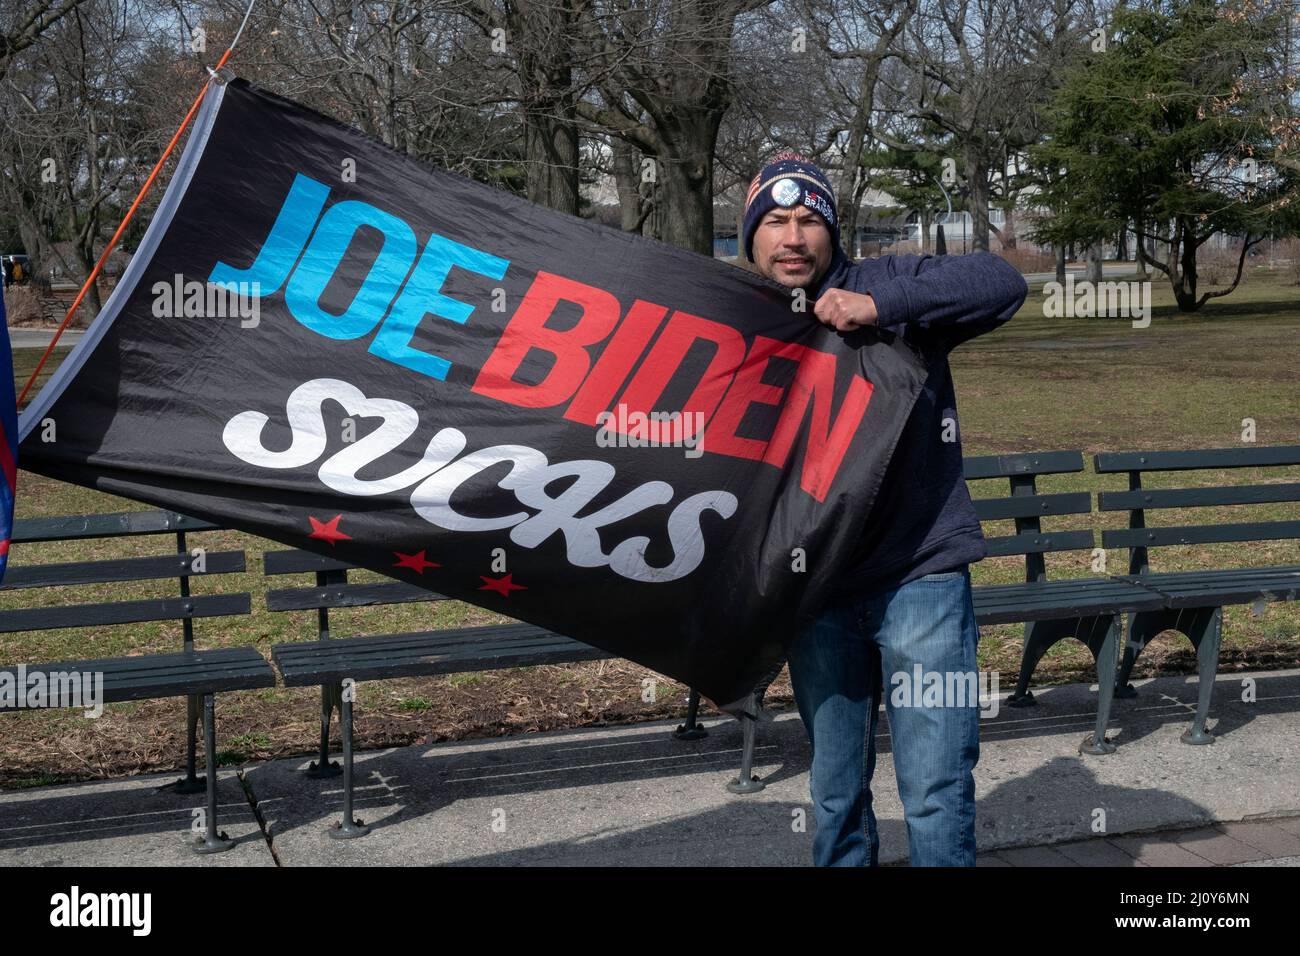 Dominican American right wing Trump supporter who rides around on his bike with pro Trump and anti Biden banners. In a park in Queens, New York City. Stock Photo